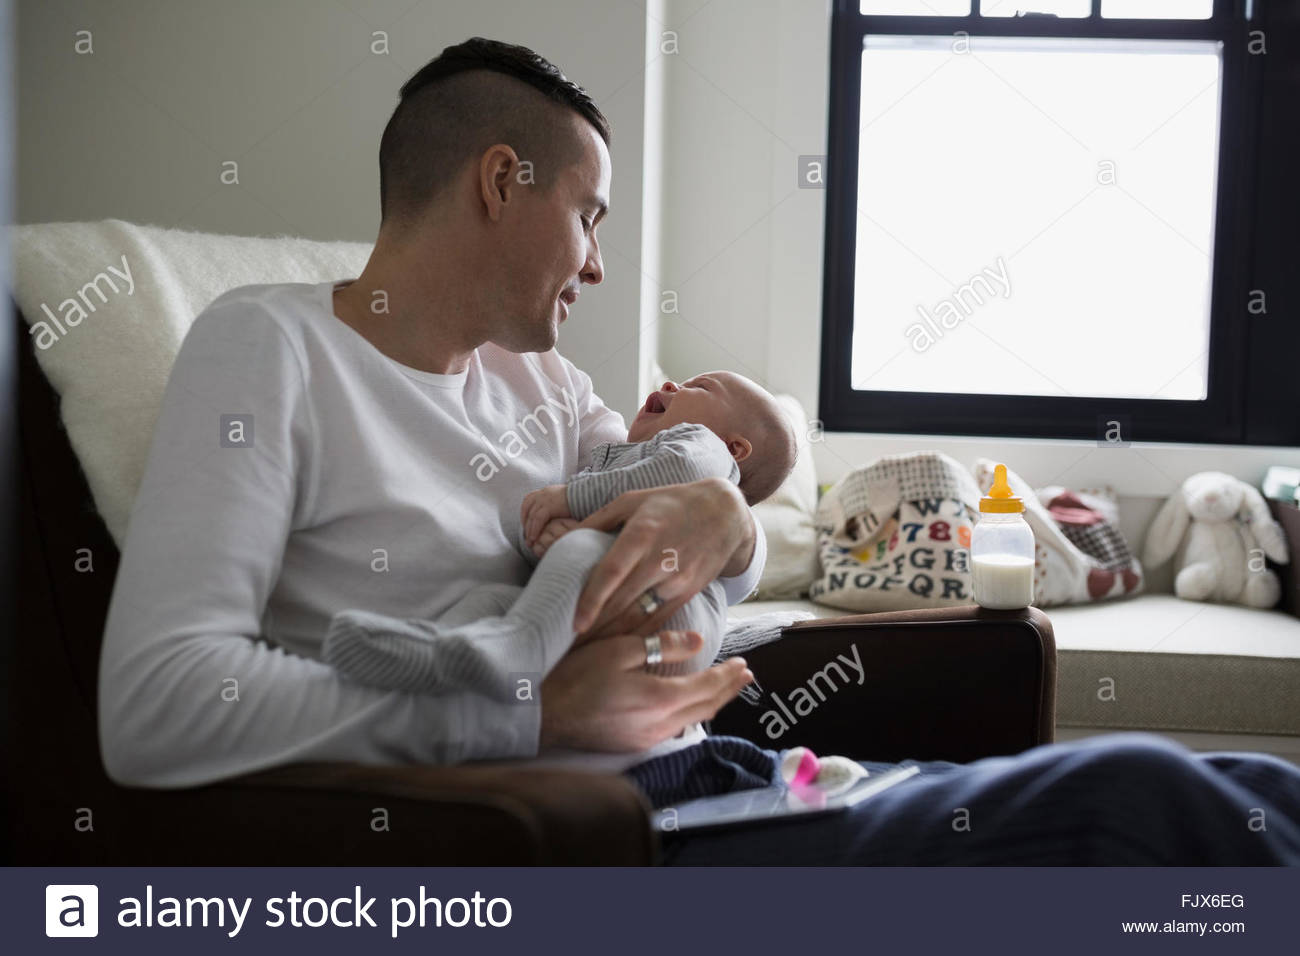 Père Fils holding baby in nursery Banque D'Images